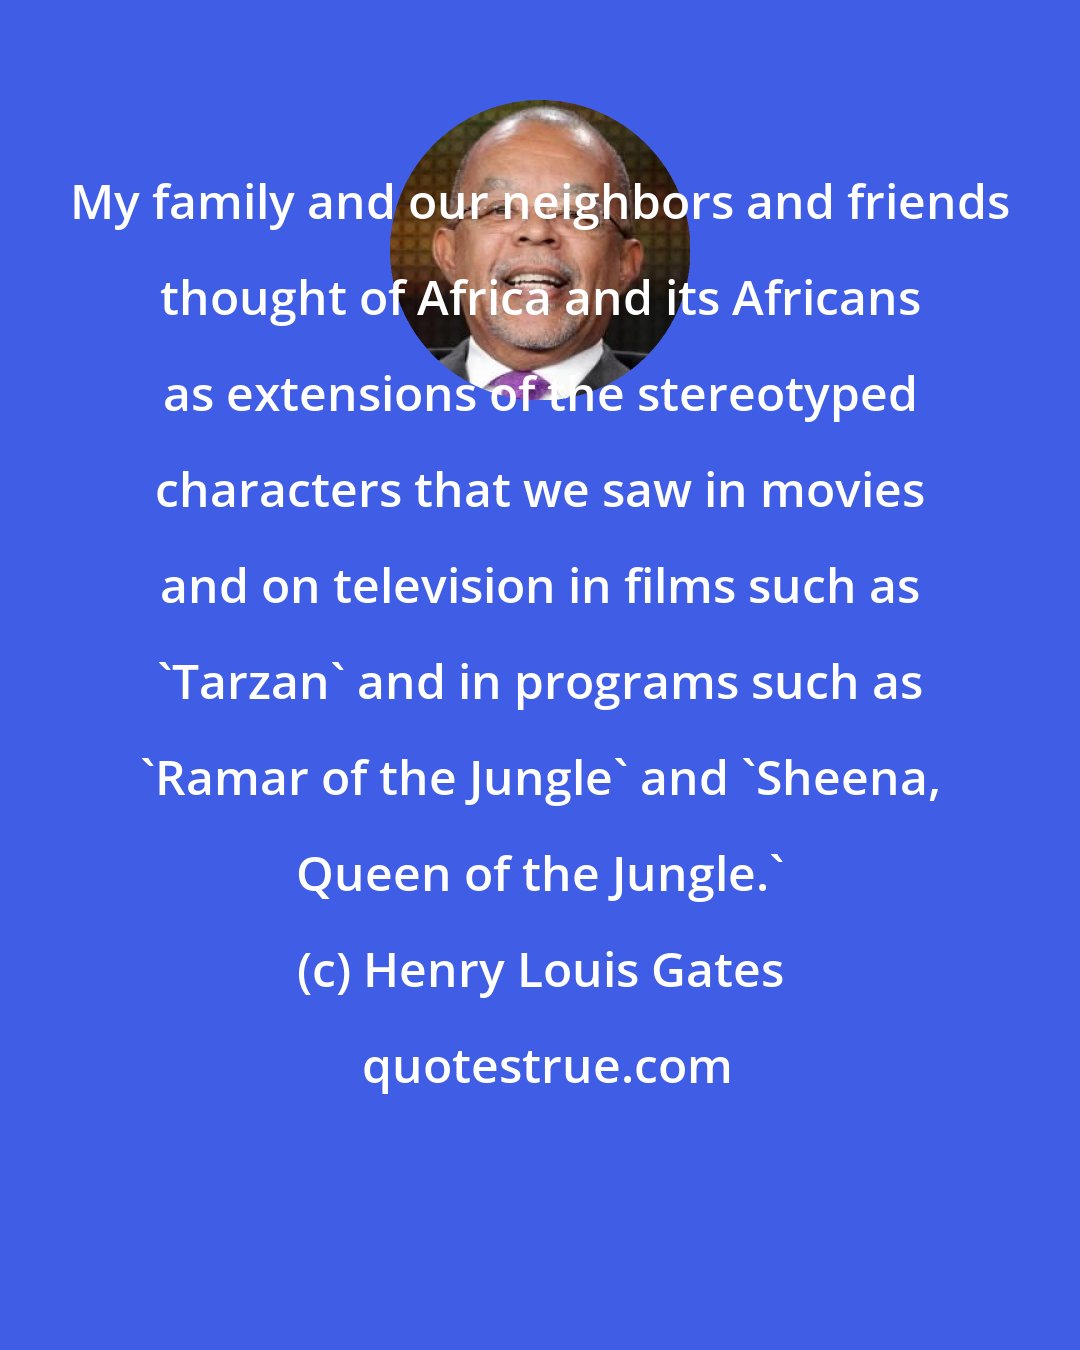 Henry Louis Gates: My family and our neighbors and friends thought of Africa and its Africans as extensions of the stereotyped characters that we saw in movies and on television in films such as 'Tarzan' and in programs such as 'Ramar of the Jungle' and 'Sheena, Queen of the Jungle.'